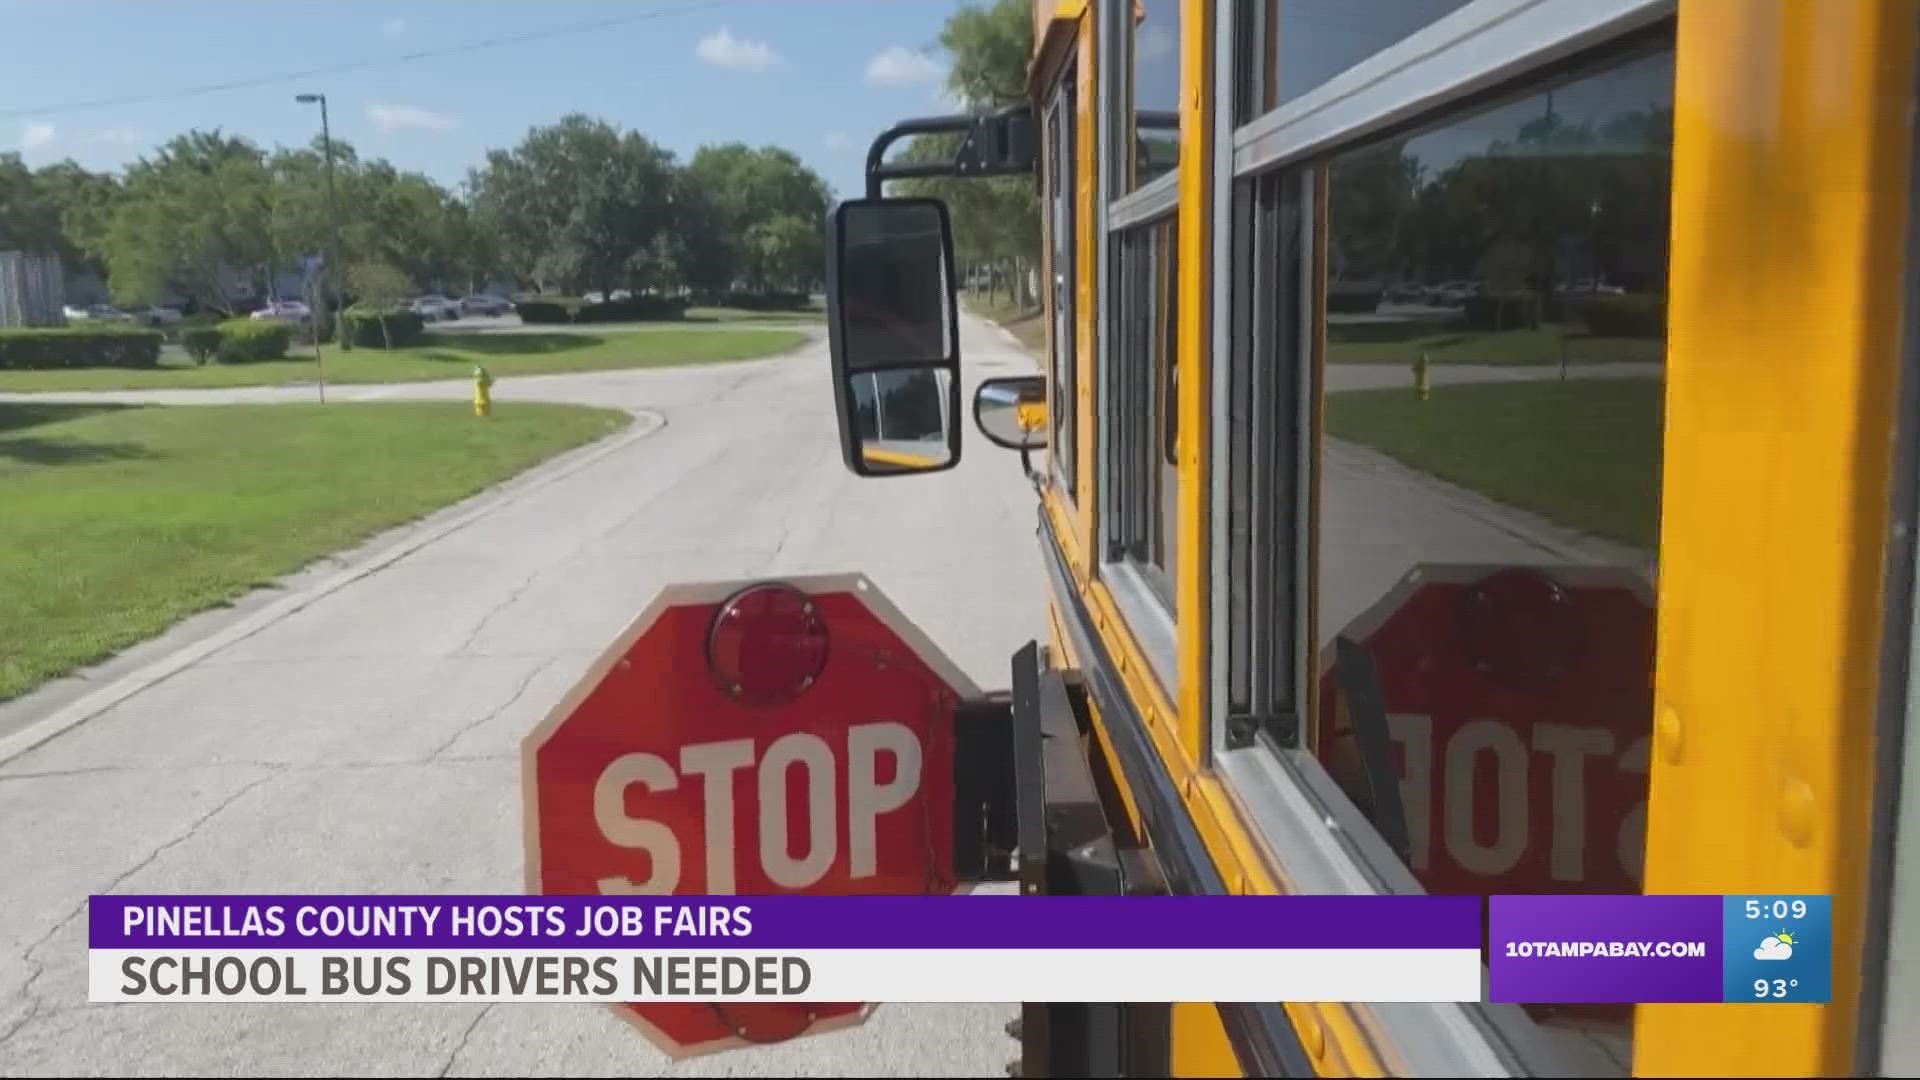 With the start of school looming, the school district is holding a series of job fairs to get more bus drivers behind the wheel.